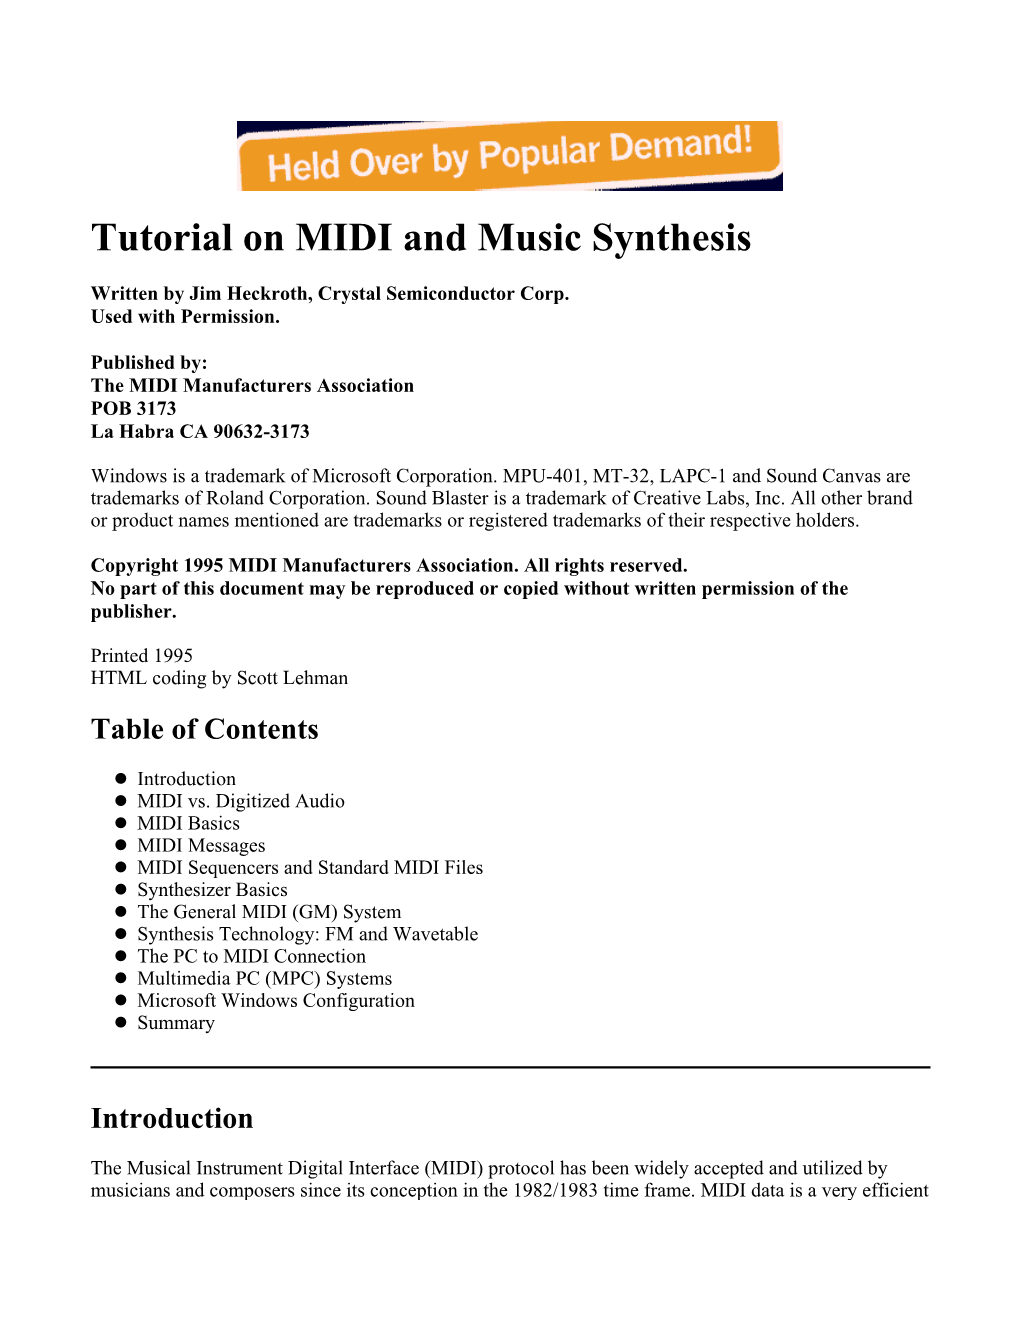 Tutorial on MIDI and Music Synthesis